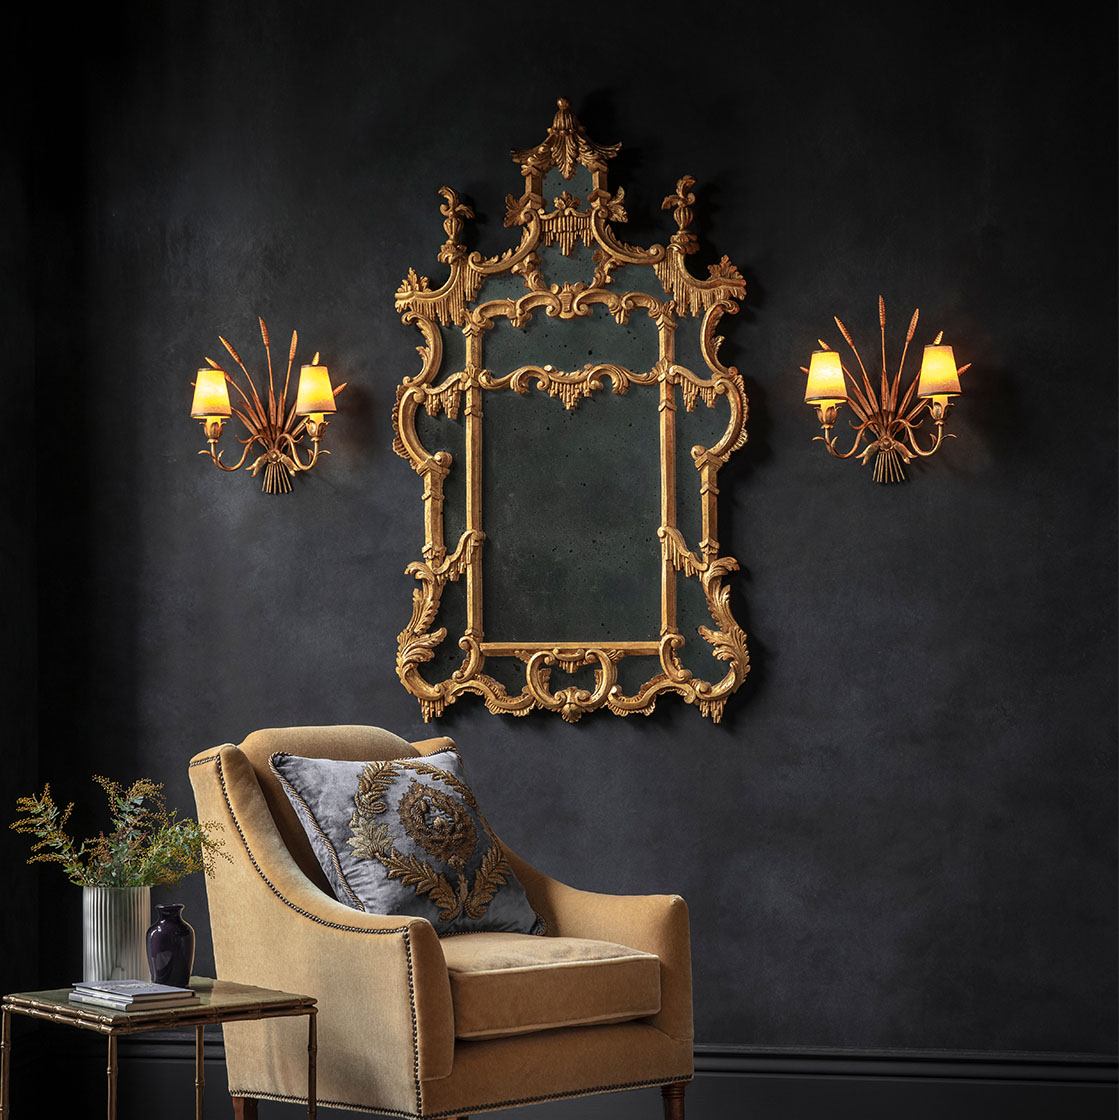 Chinoiserie mirror in Burnt Gold with Alexandra chair and Rossini cushion and Wheatsheaf lights - Beaumont & Fletcher